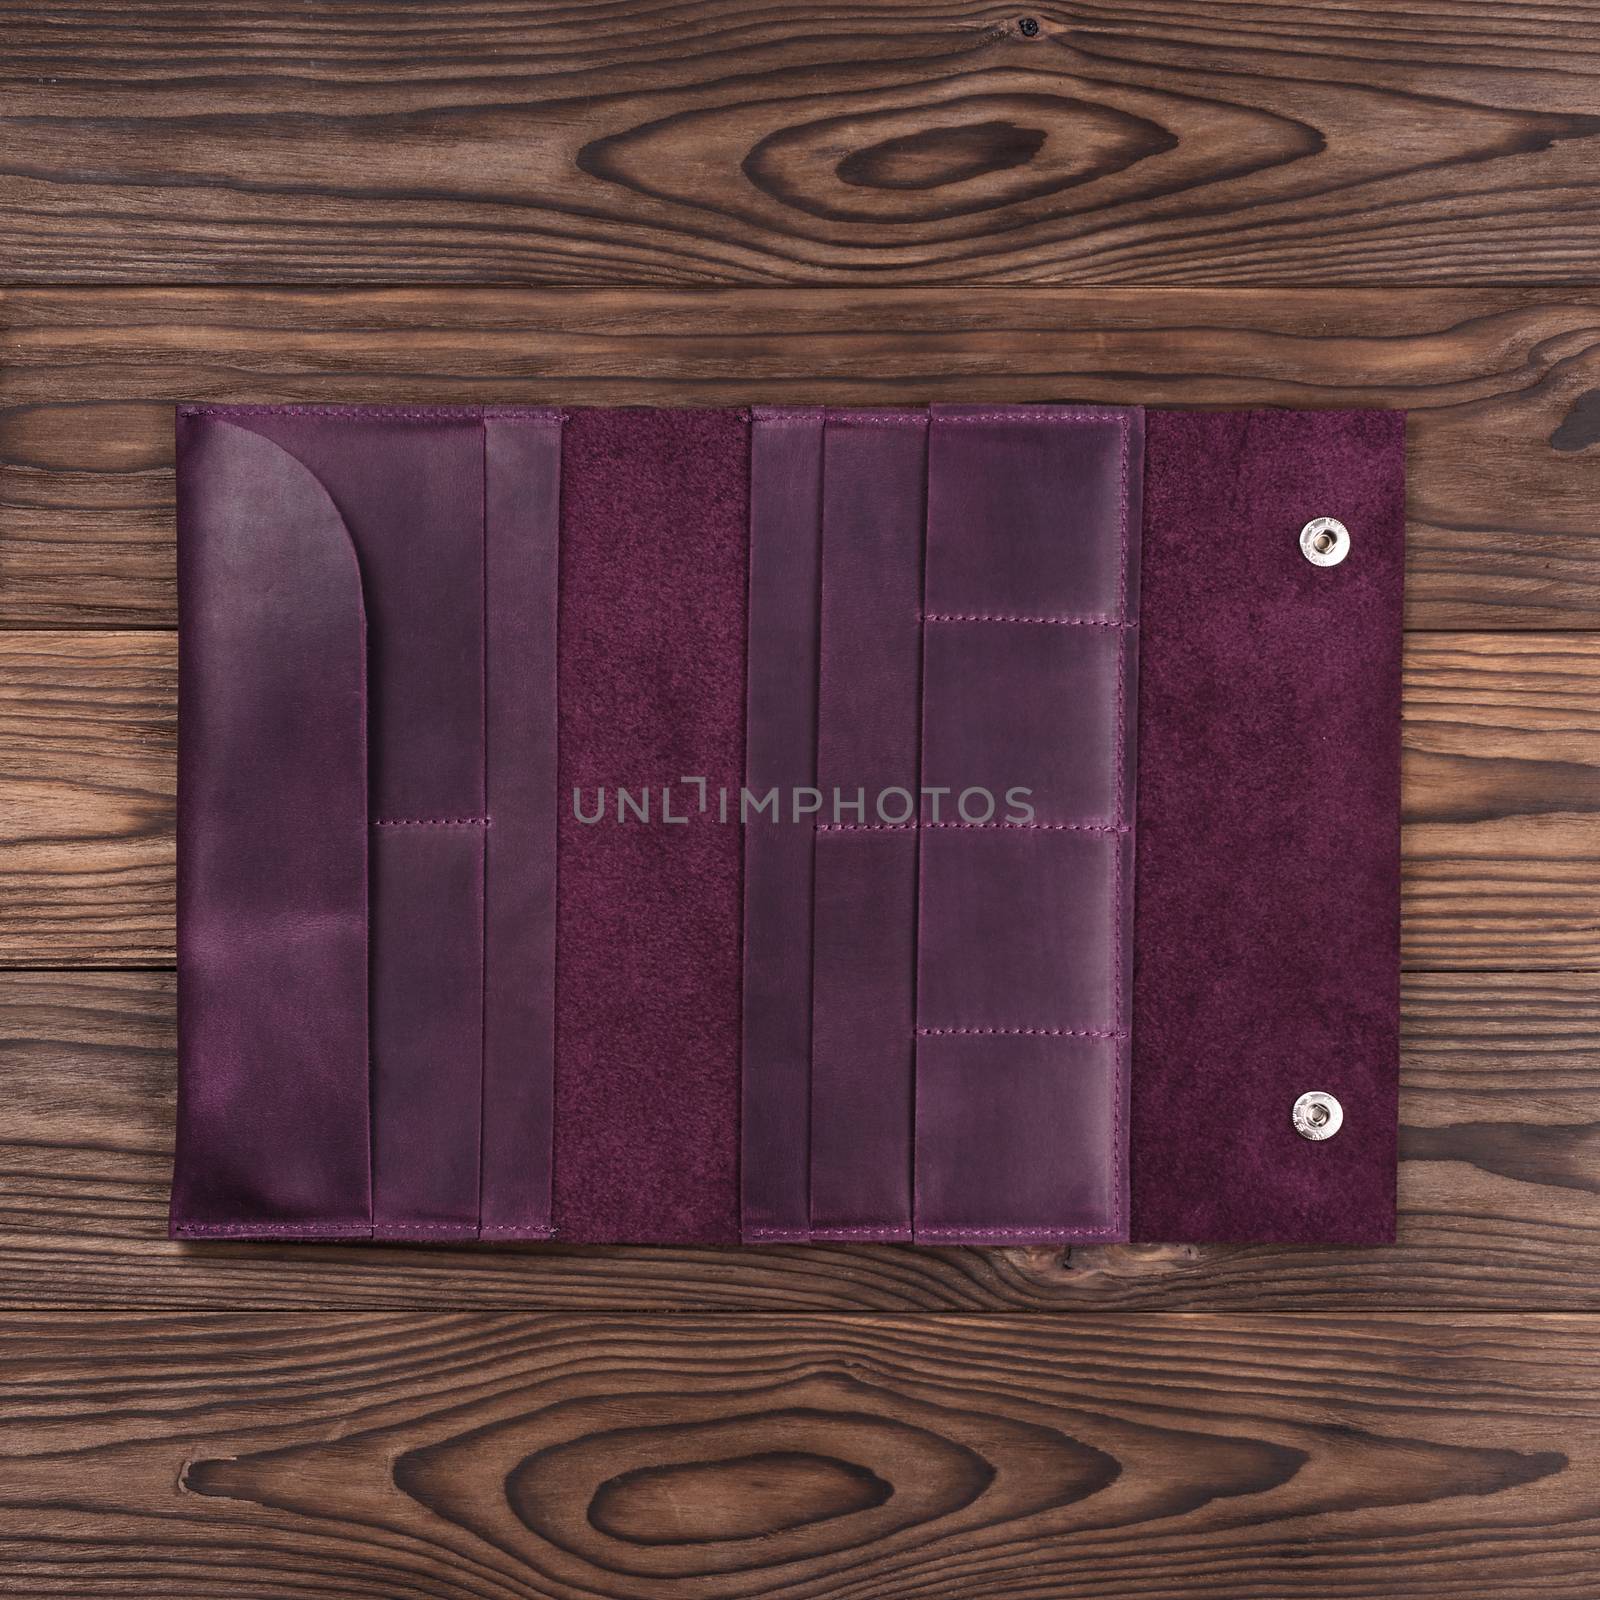 Purple handmade travel wallet lies on textured wooden backgroud closeup. Wallet is open and empty. Up to down view. Stock photo of businessman accessories. by alexsdriver